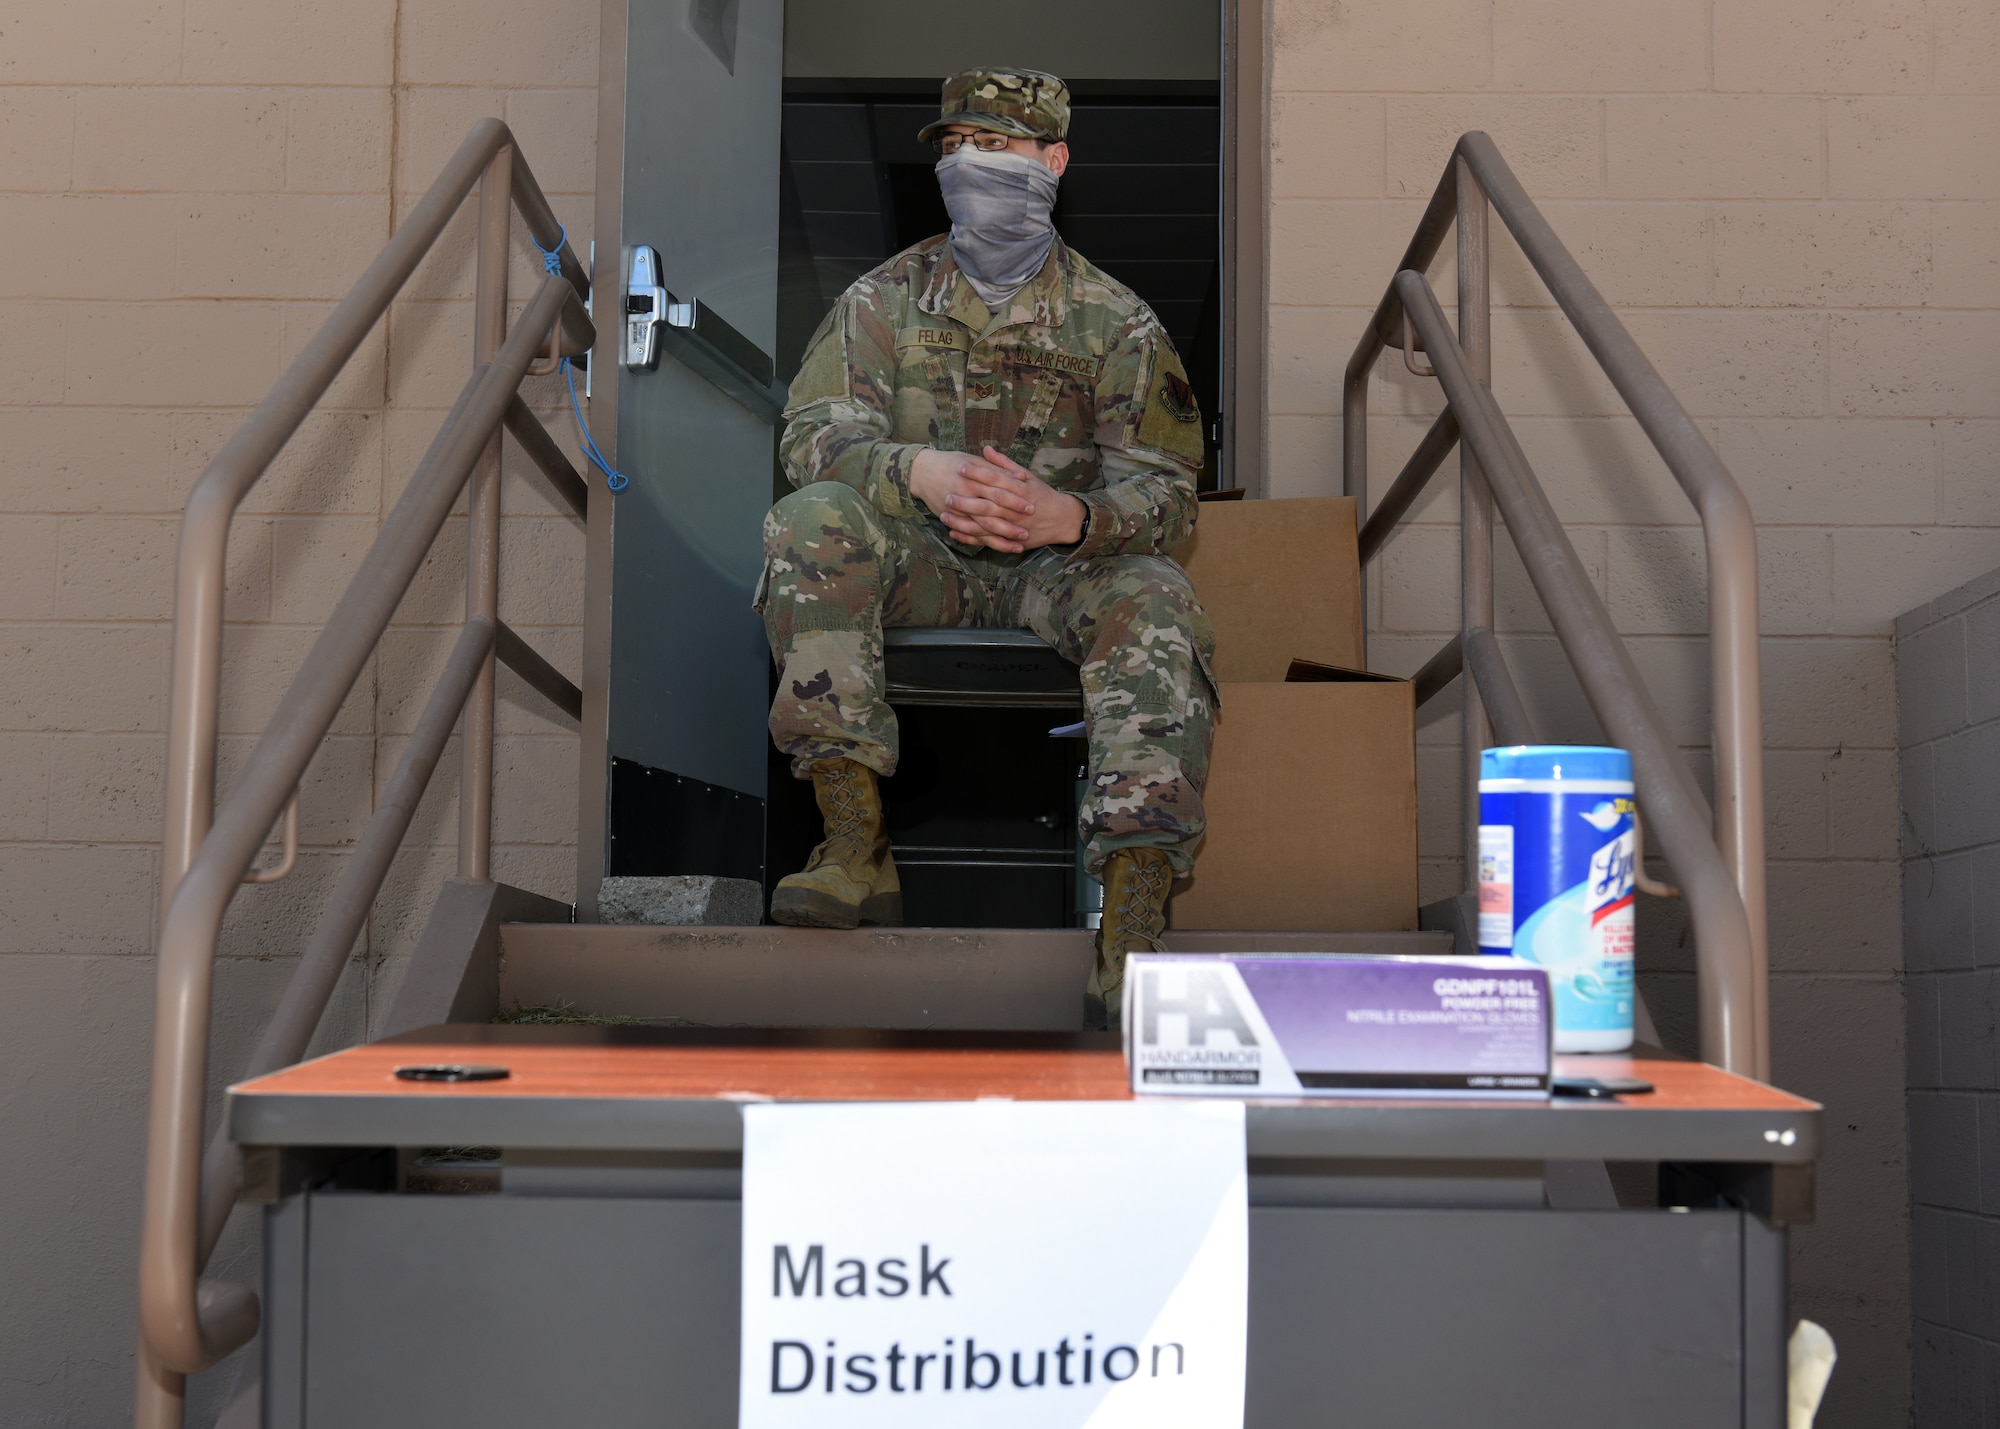 A photo of a U.S. Airman sitting on doorsteps waiting to distribute cloth masks